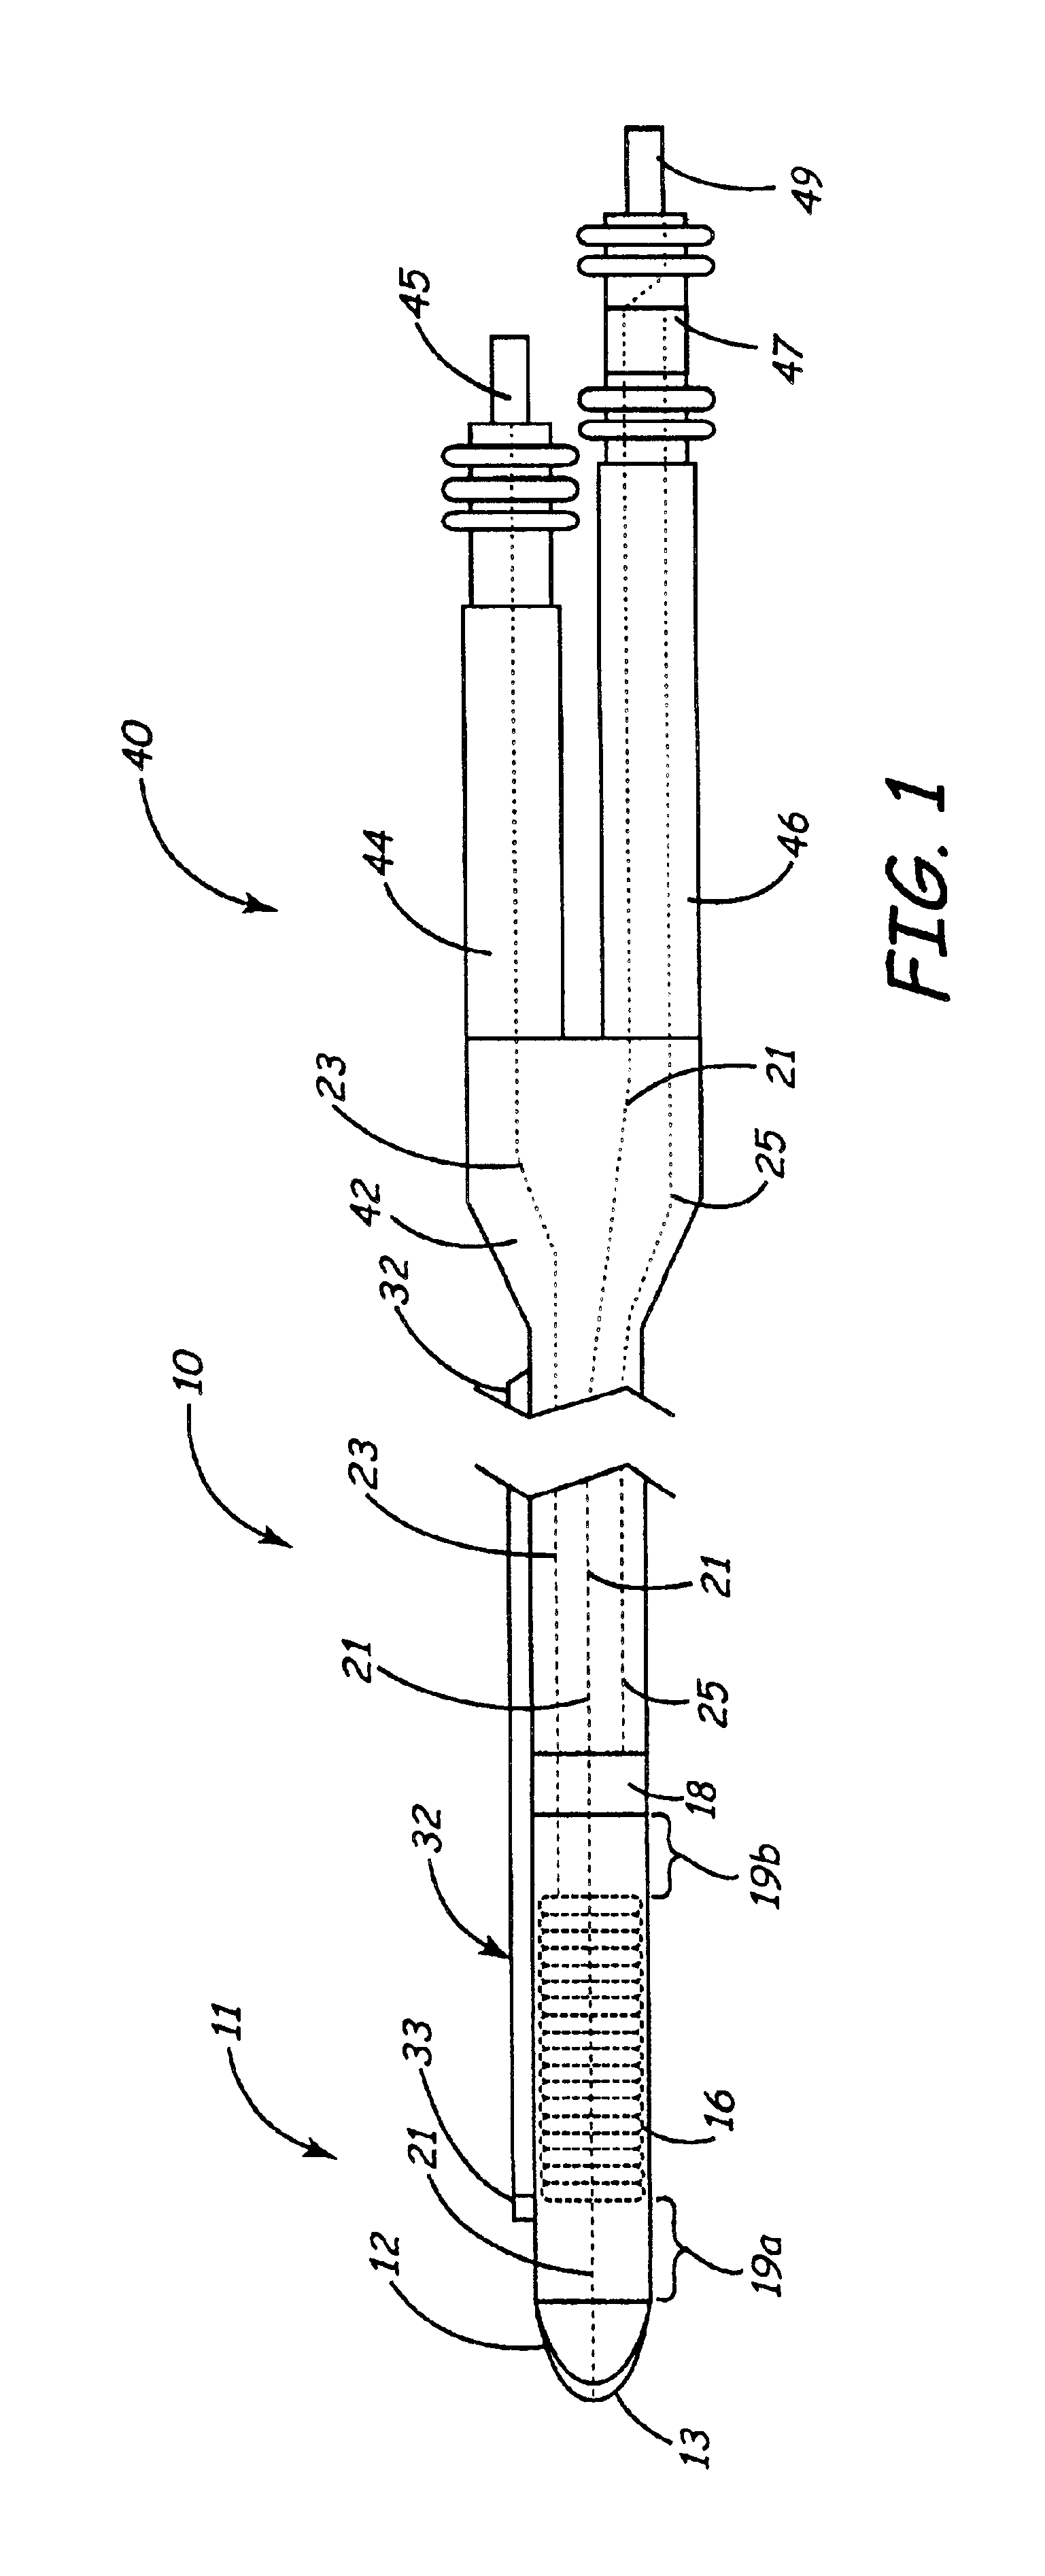 System for providing electrical stimulation to a left chamber of a heart